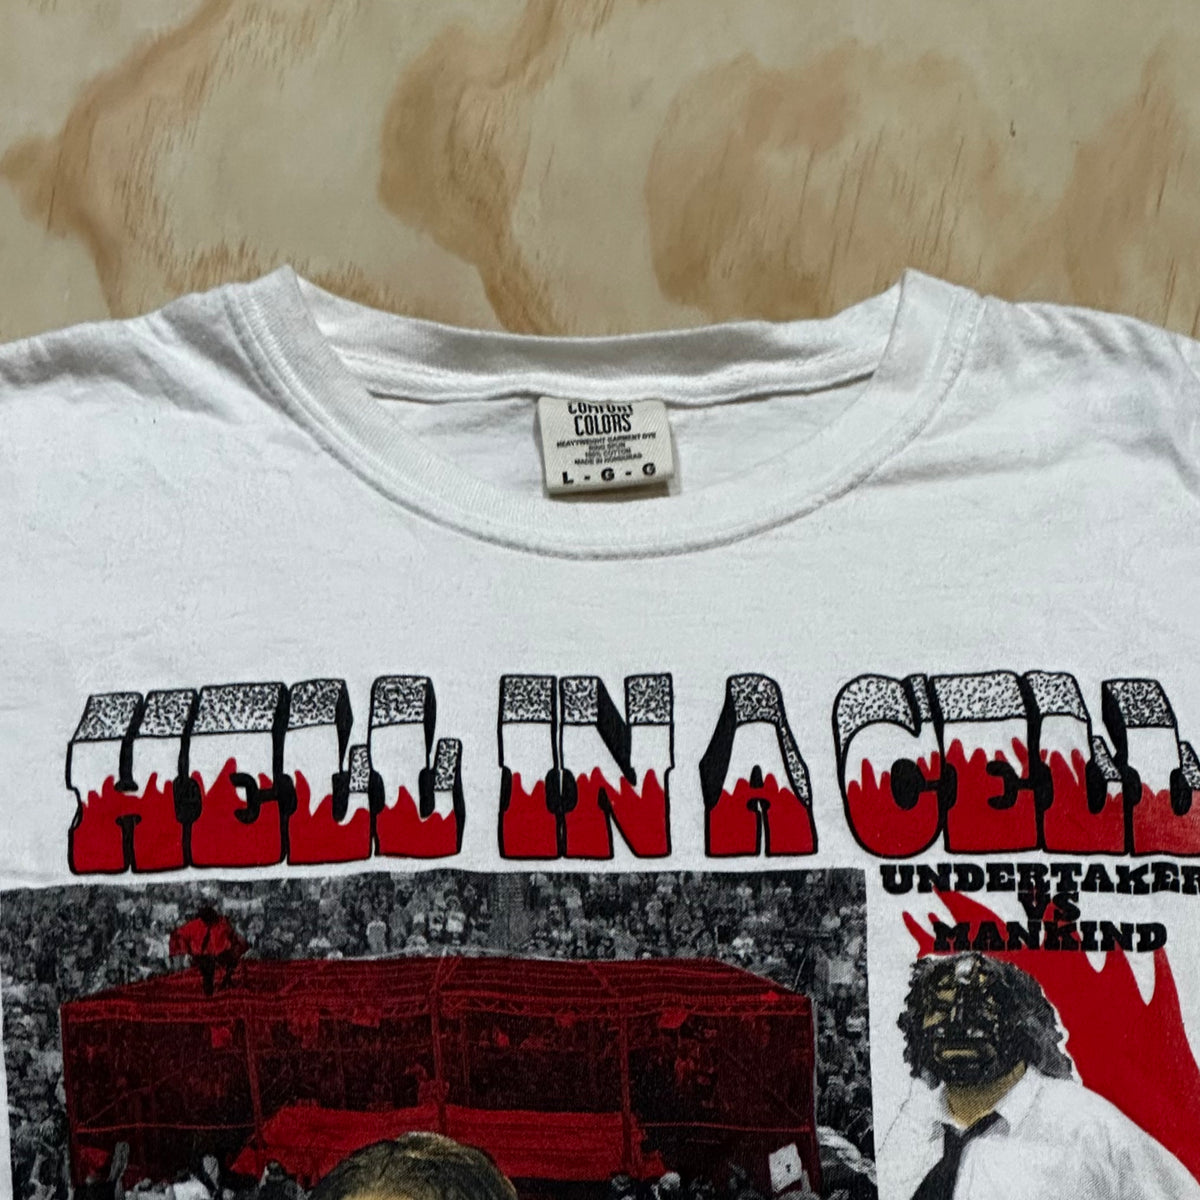 1998 WWF Hell In A Cell Undertaker vs Mankind King of the ring shirt